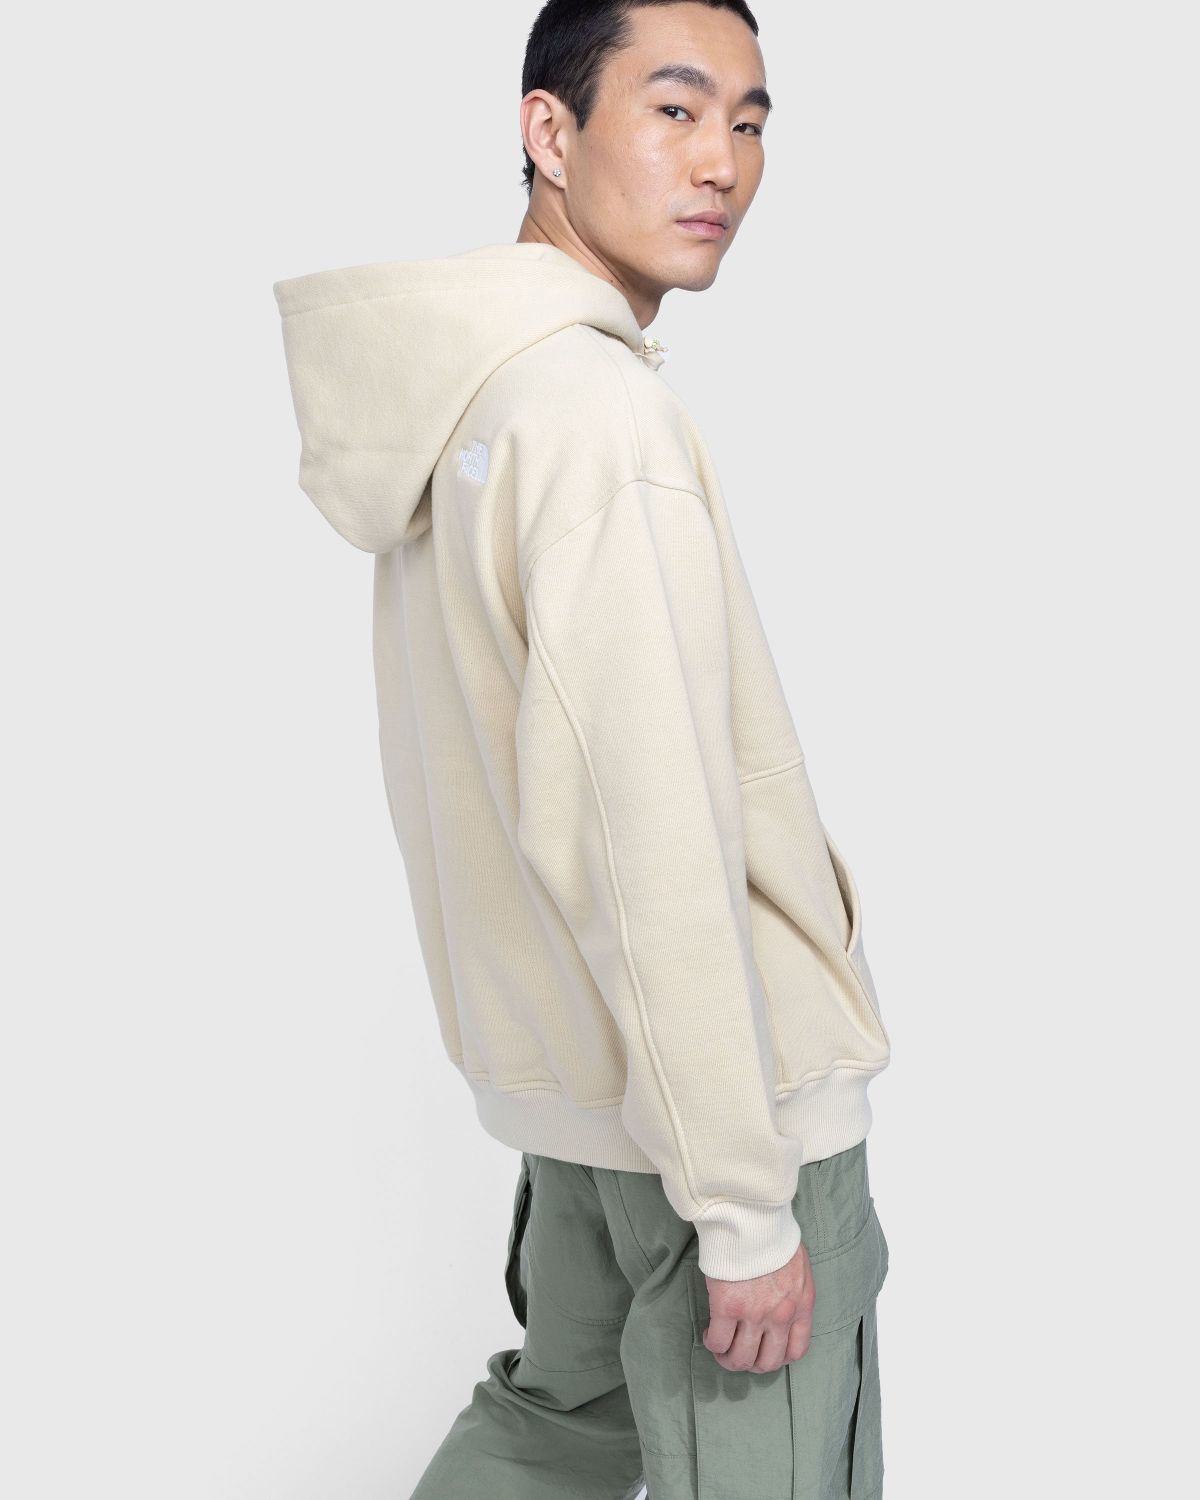 The North Face – Icon Hoodie Gravel - Sweats - Grey - Image 3